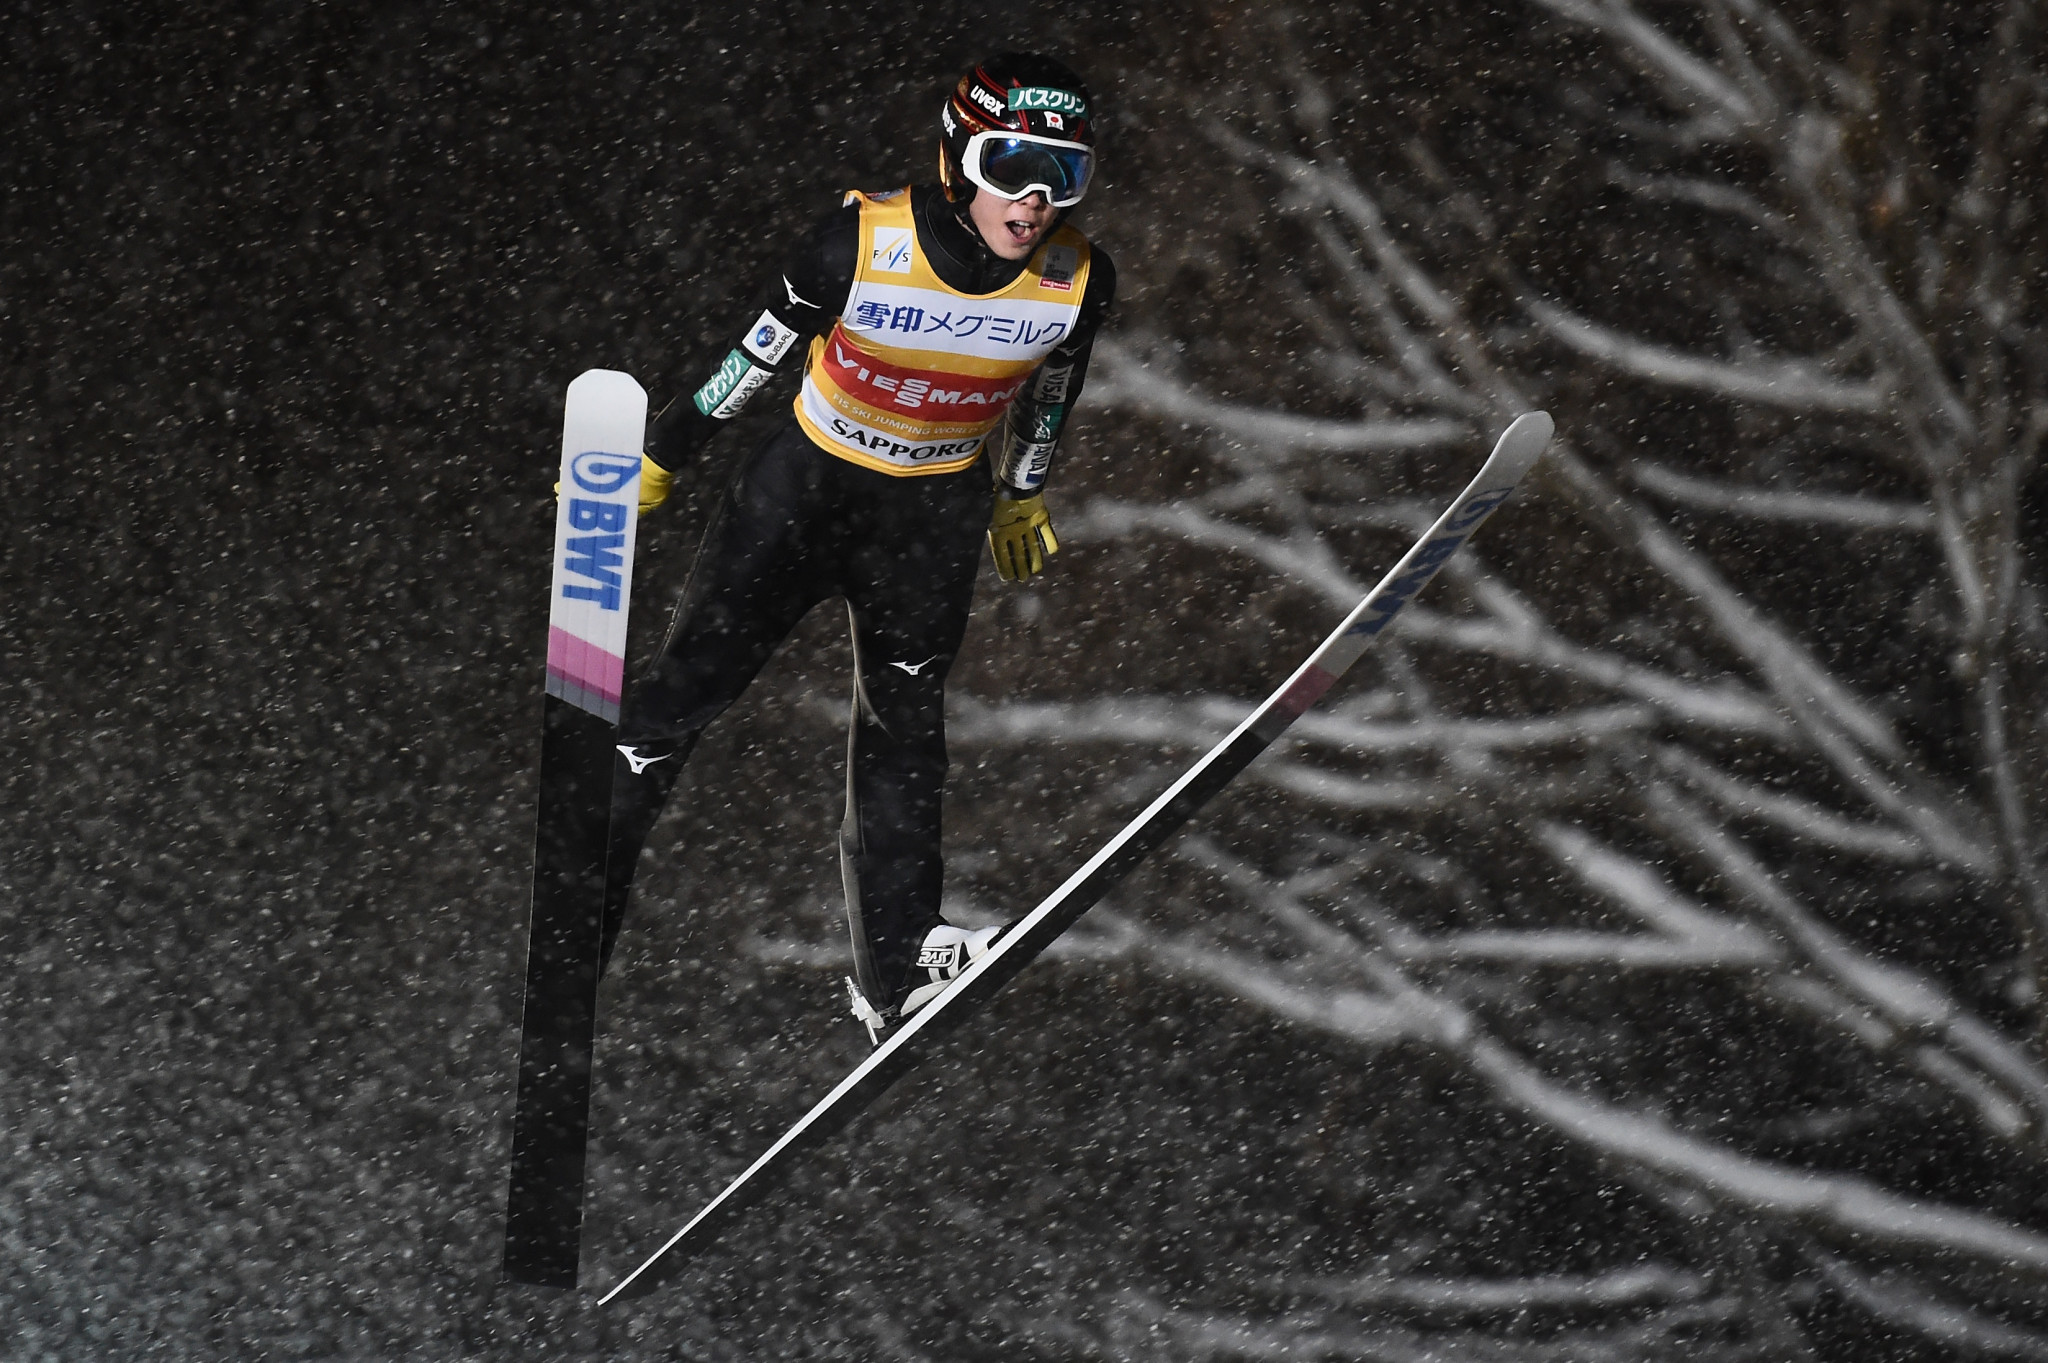 Current World Cup leader Ryoyu Kobayashi qualified for tomorrow's main event in third ©Getty Images